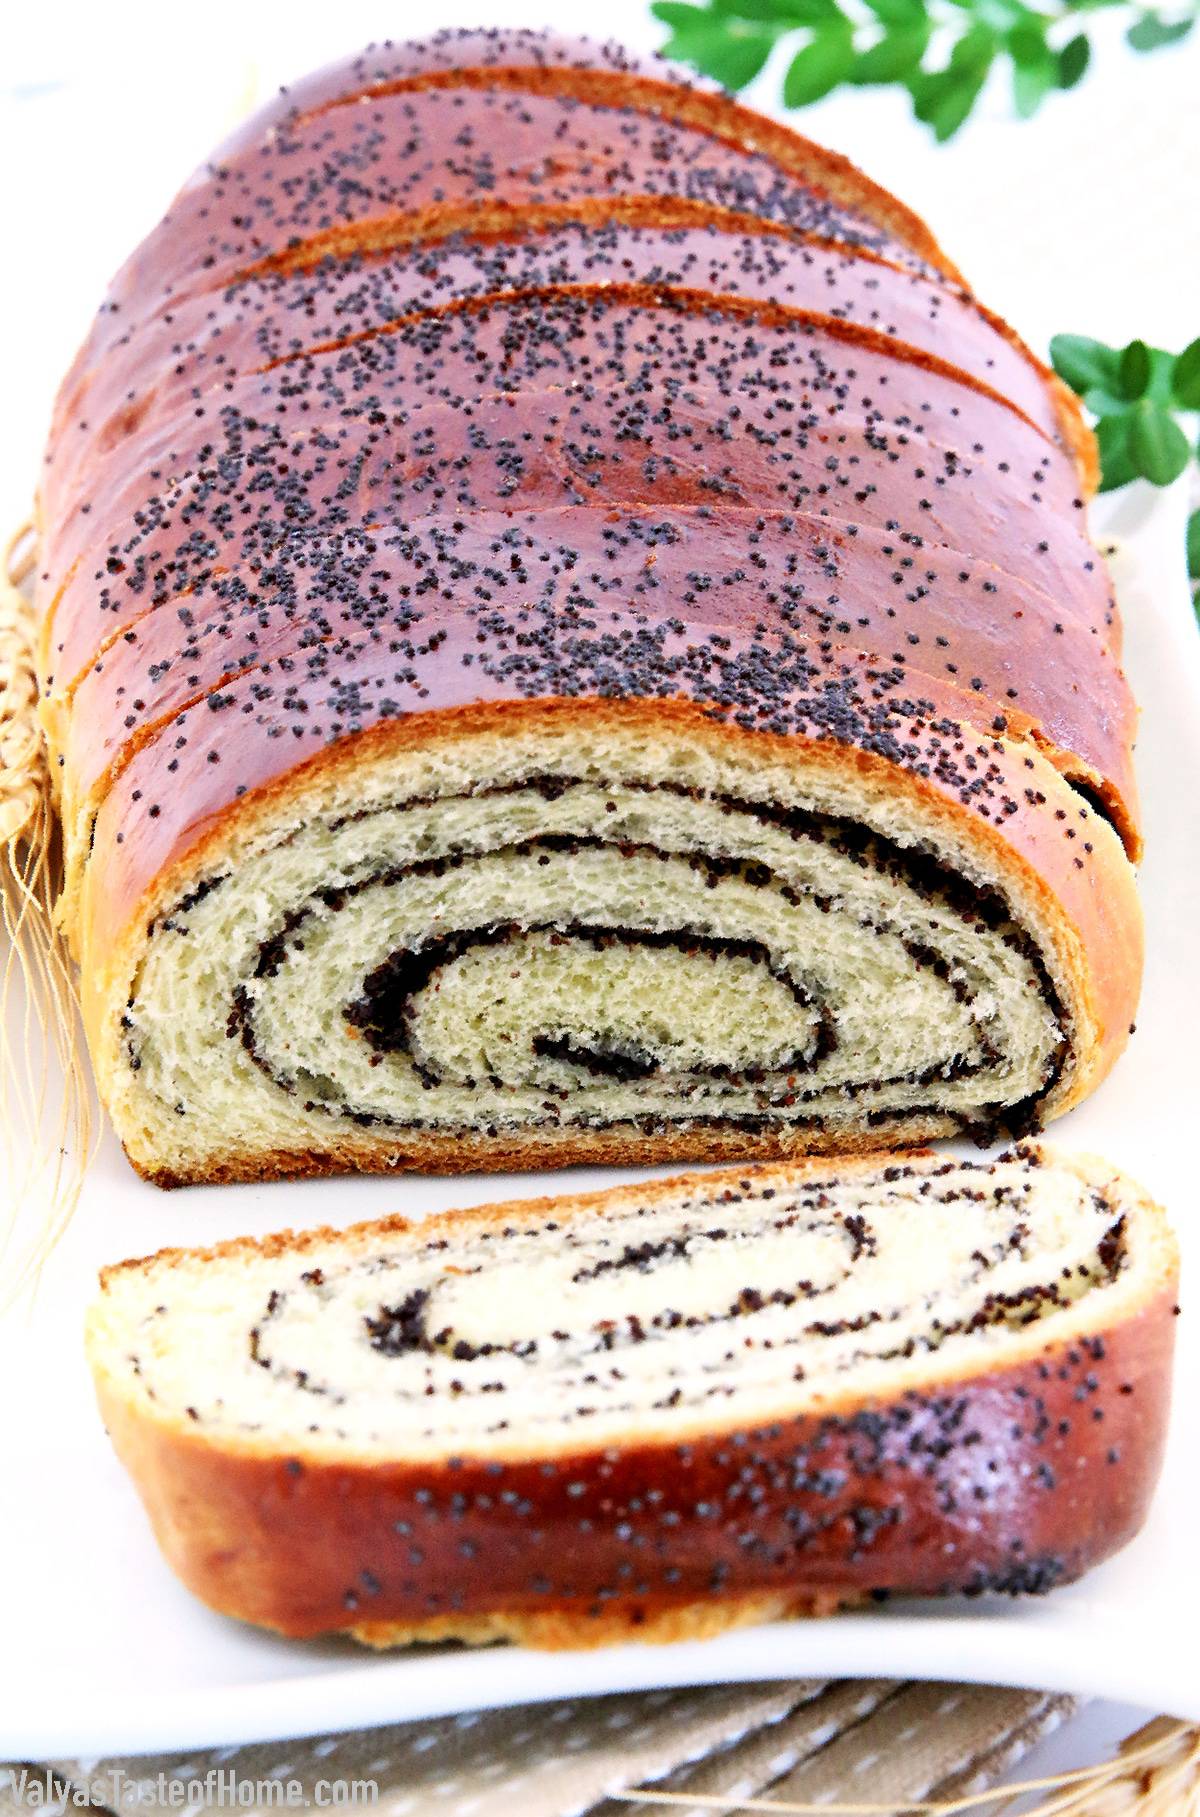 Finally, I'm sharing an age-old Easy Poppy Seed Roll Recipe that never gets old. This is a very special traditional recipe that has been handed down in my family for more years than I can even trace back. Pillow-soft, moist, and so flavorsome. Words even fail to describe how scrumptious it is. #macowiec #poppyseedroll #sweetyeastbread #valyastasteofhome